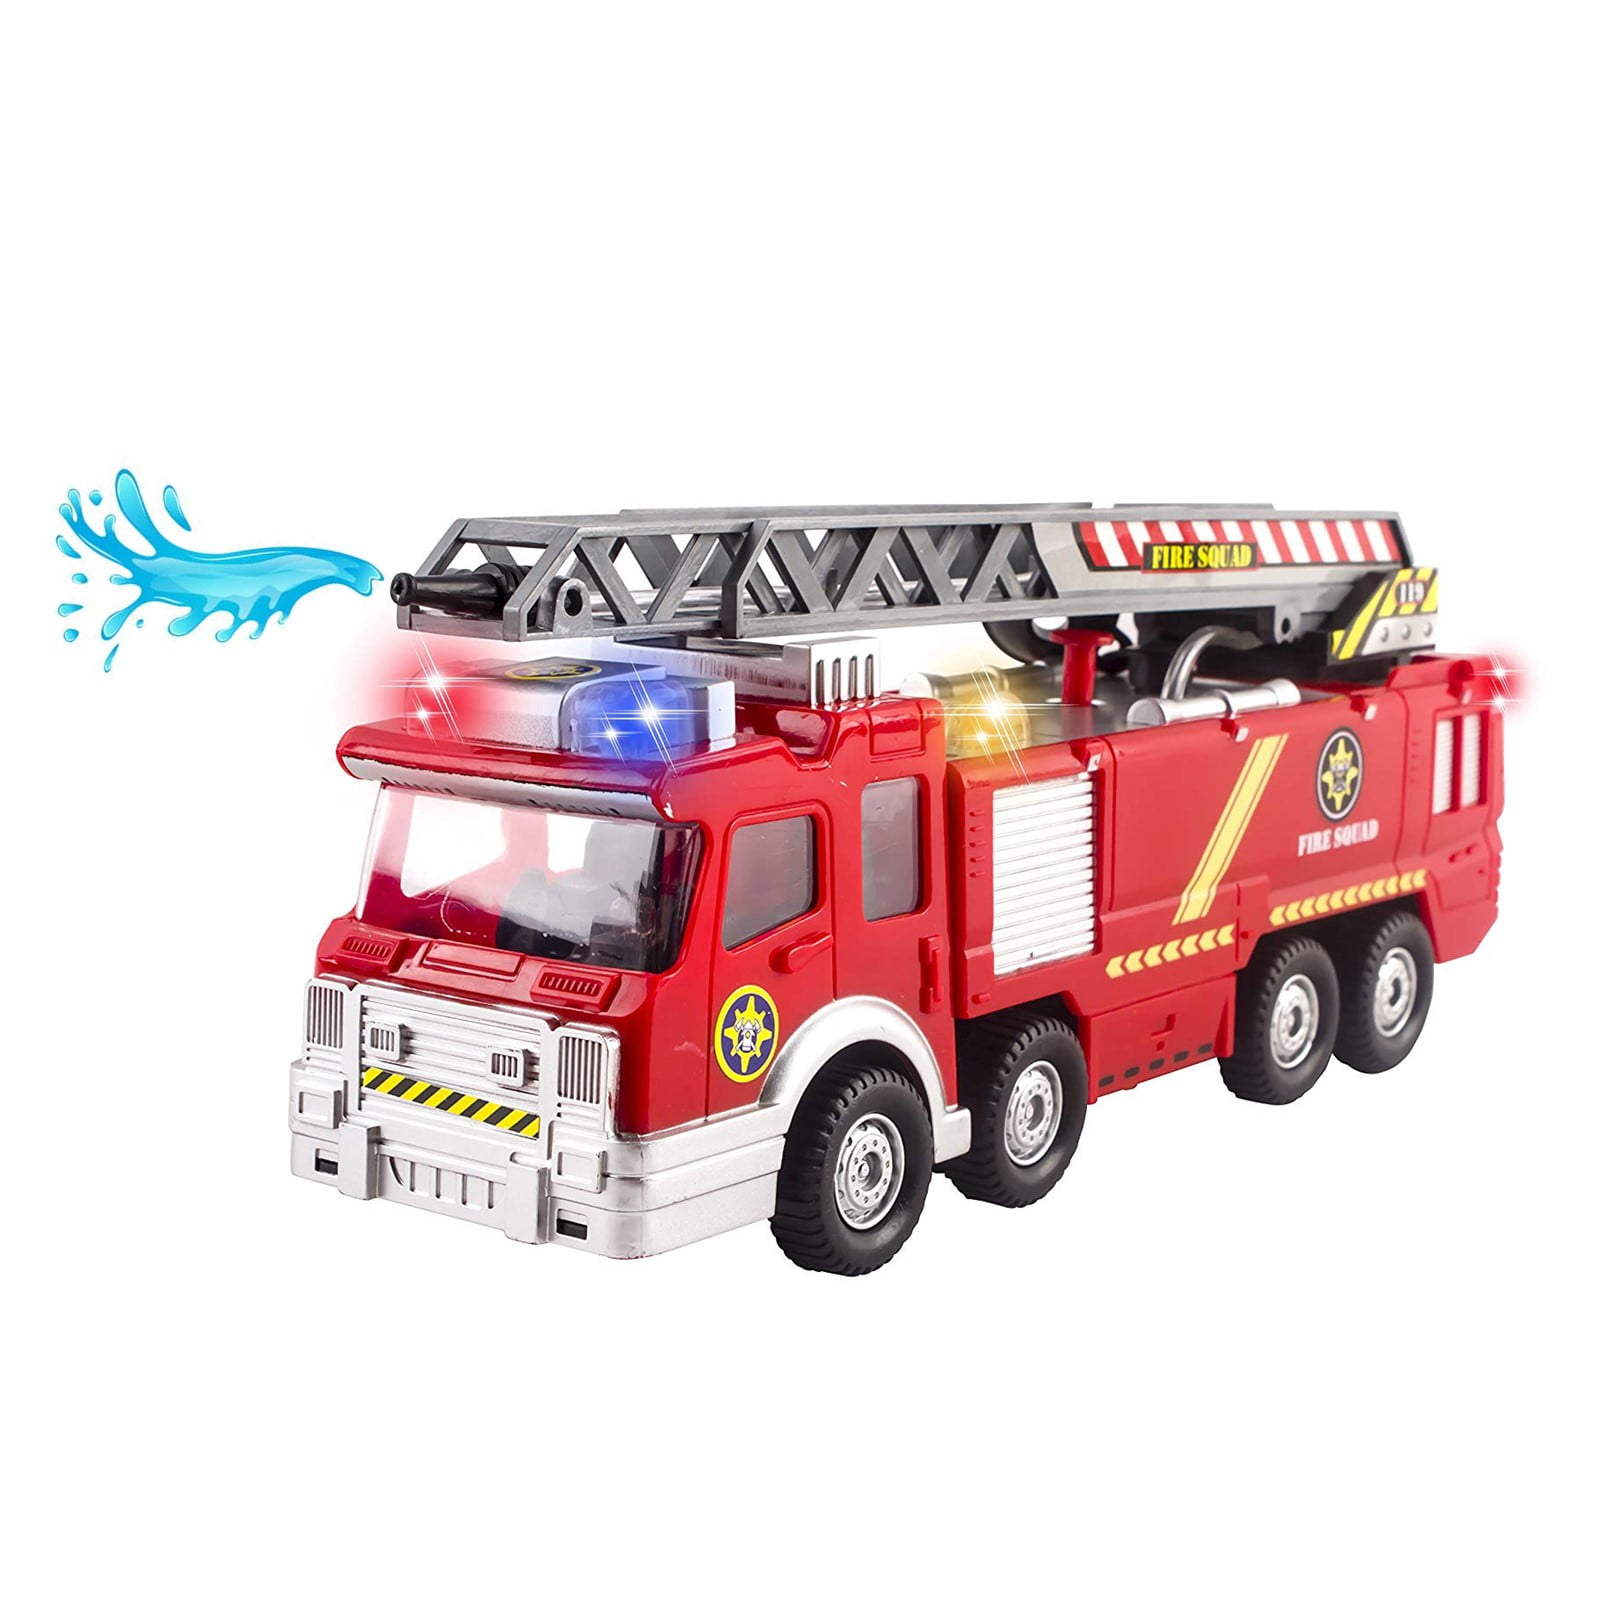 Fire Truck Toy Rescue With Shooting Water Flashing Lights Siren Extending Ladder 